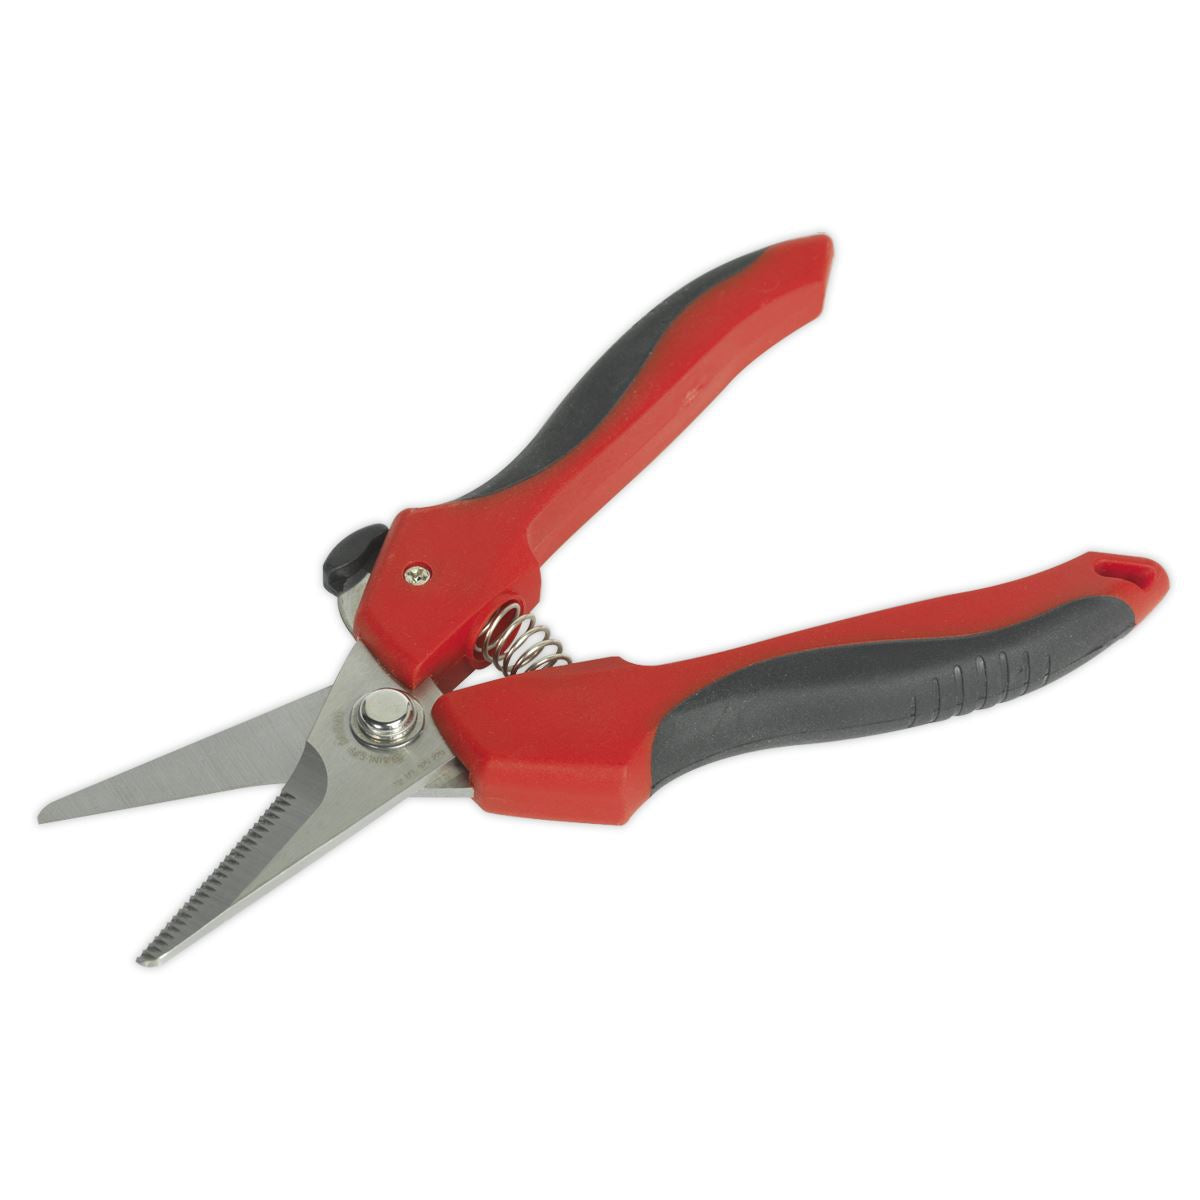 Sealey 190mm Universal Shears With Safety Lock